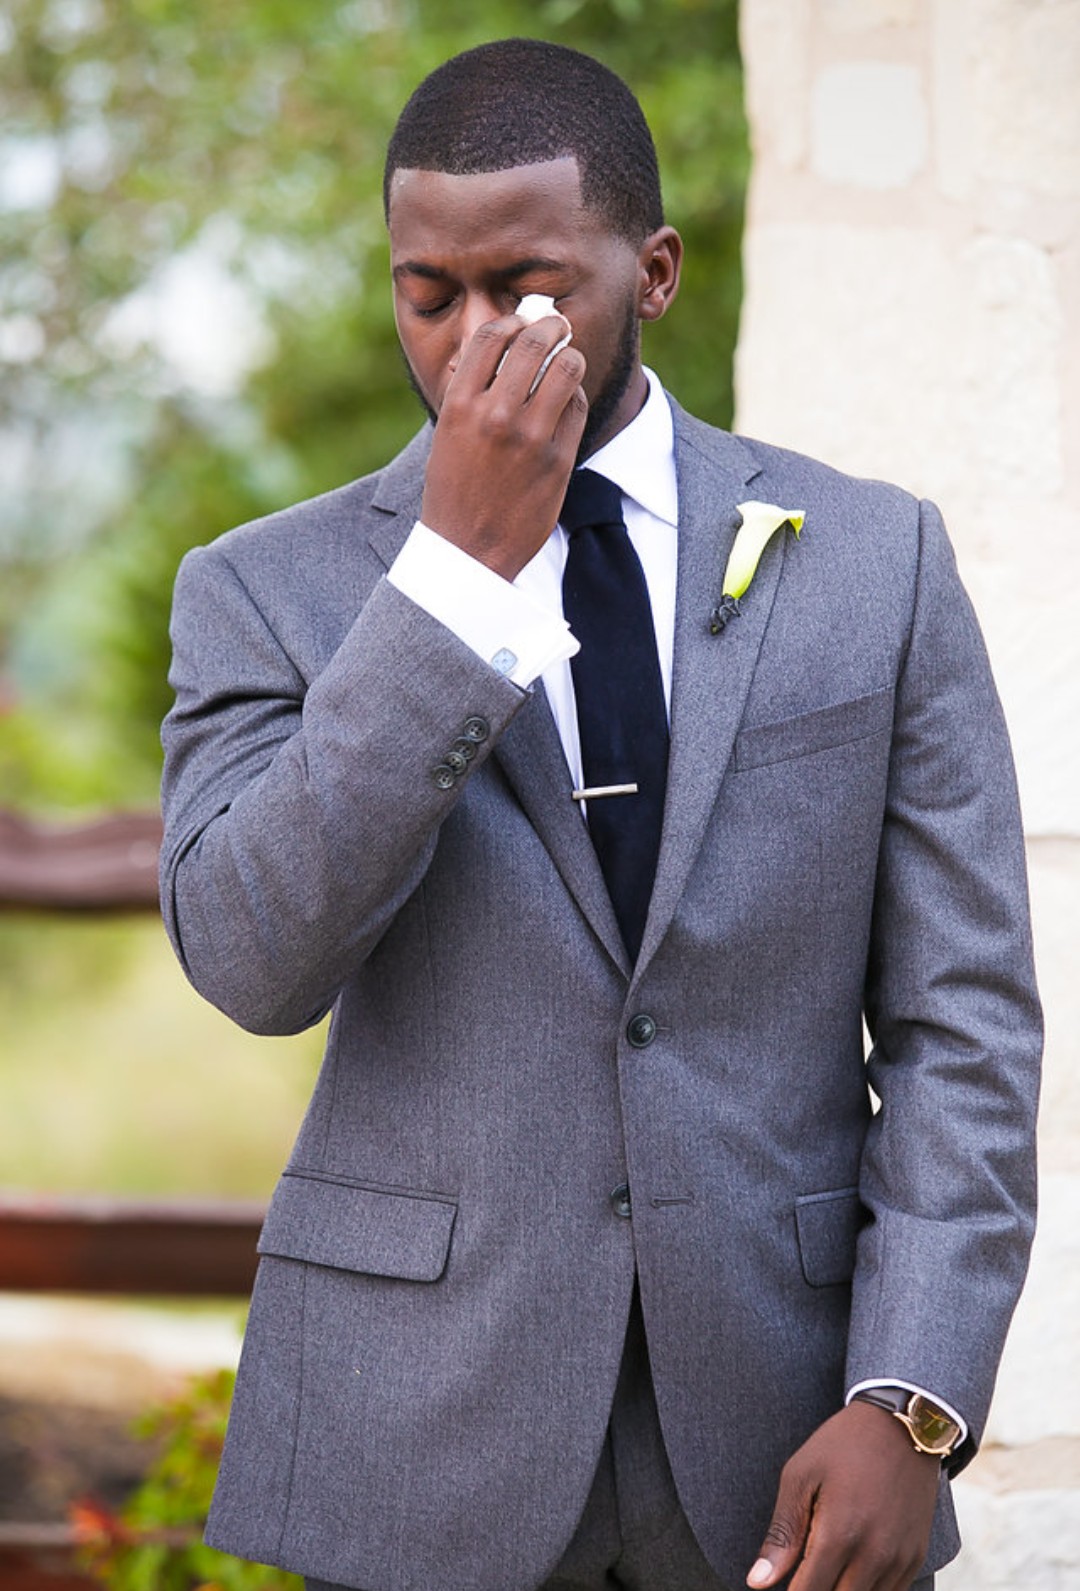 Photo showing Harris wiping his eyes with a tissue during the wedding ceremony.